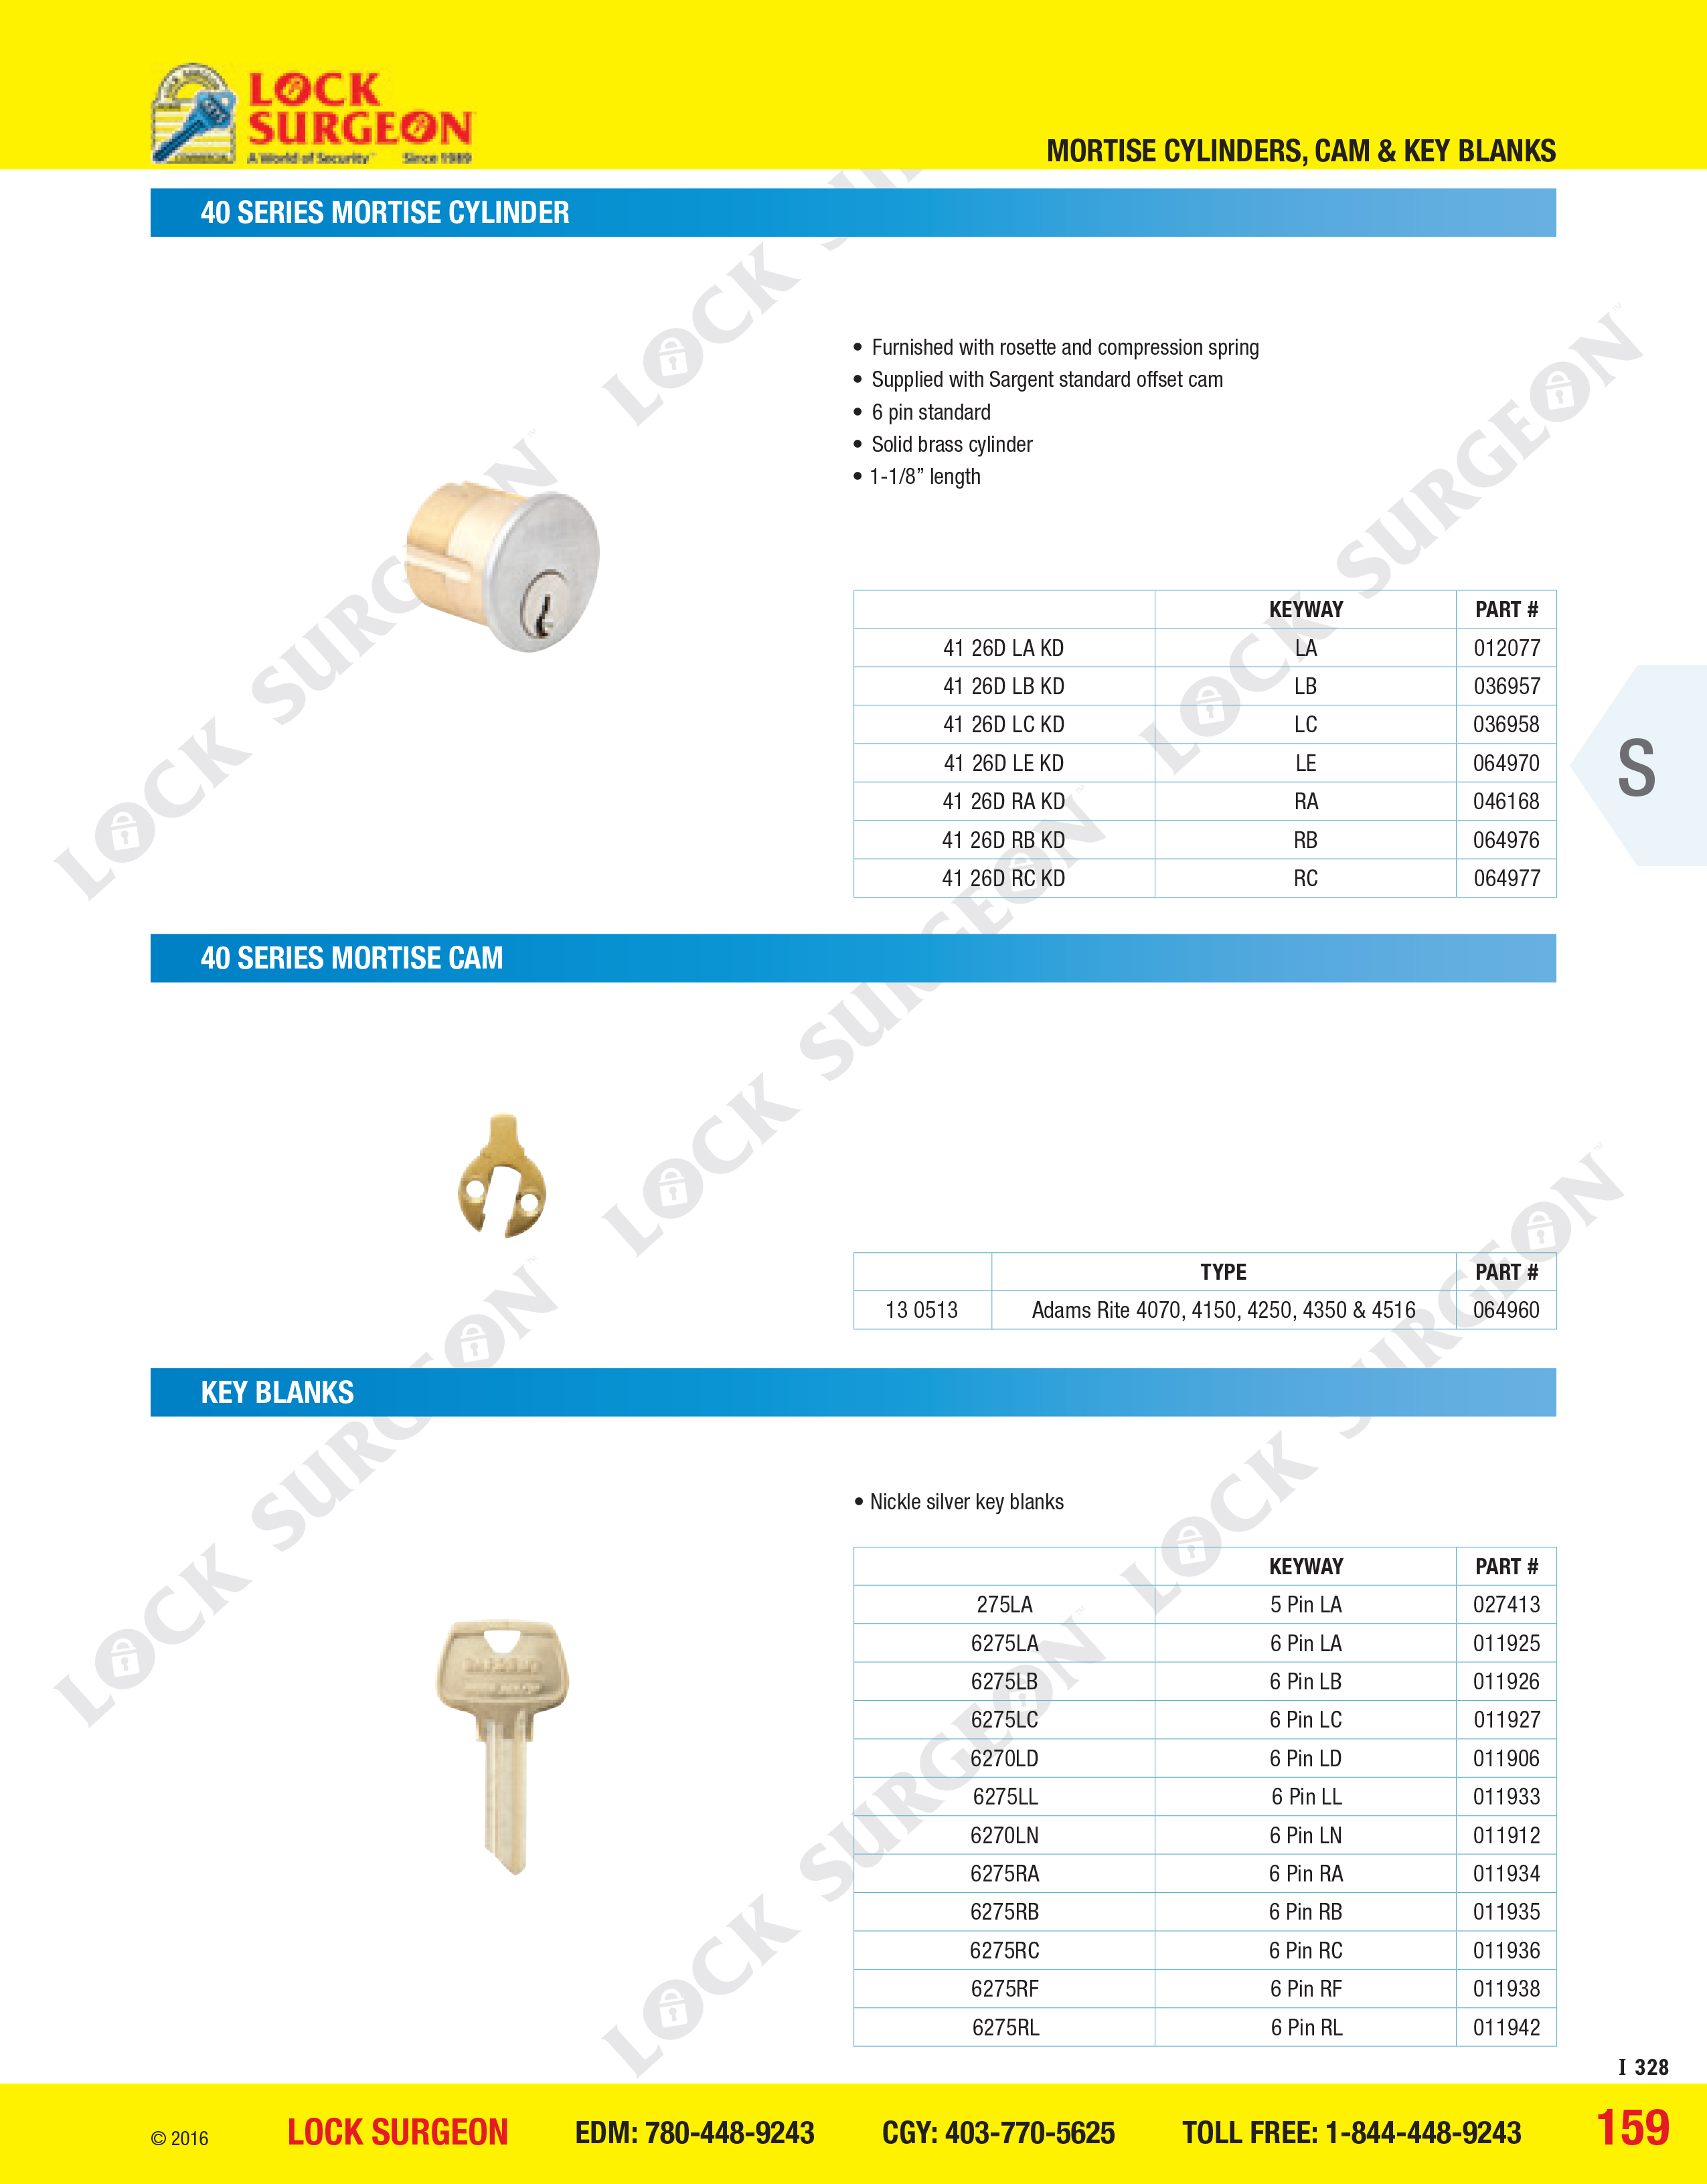 40-Series mortise cylinder, 40-Series mortise cam and key blanks